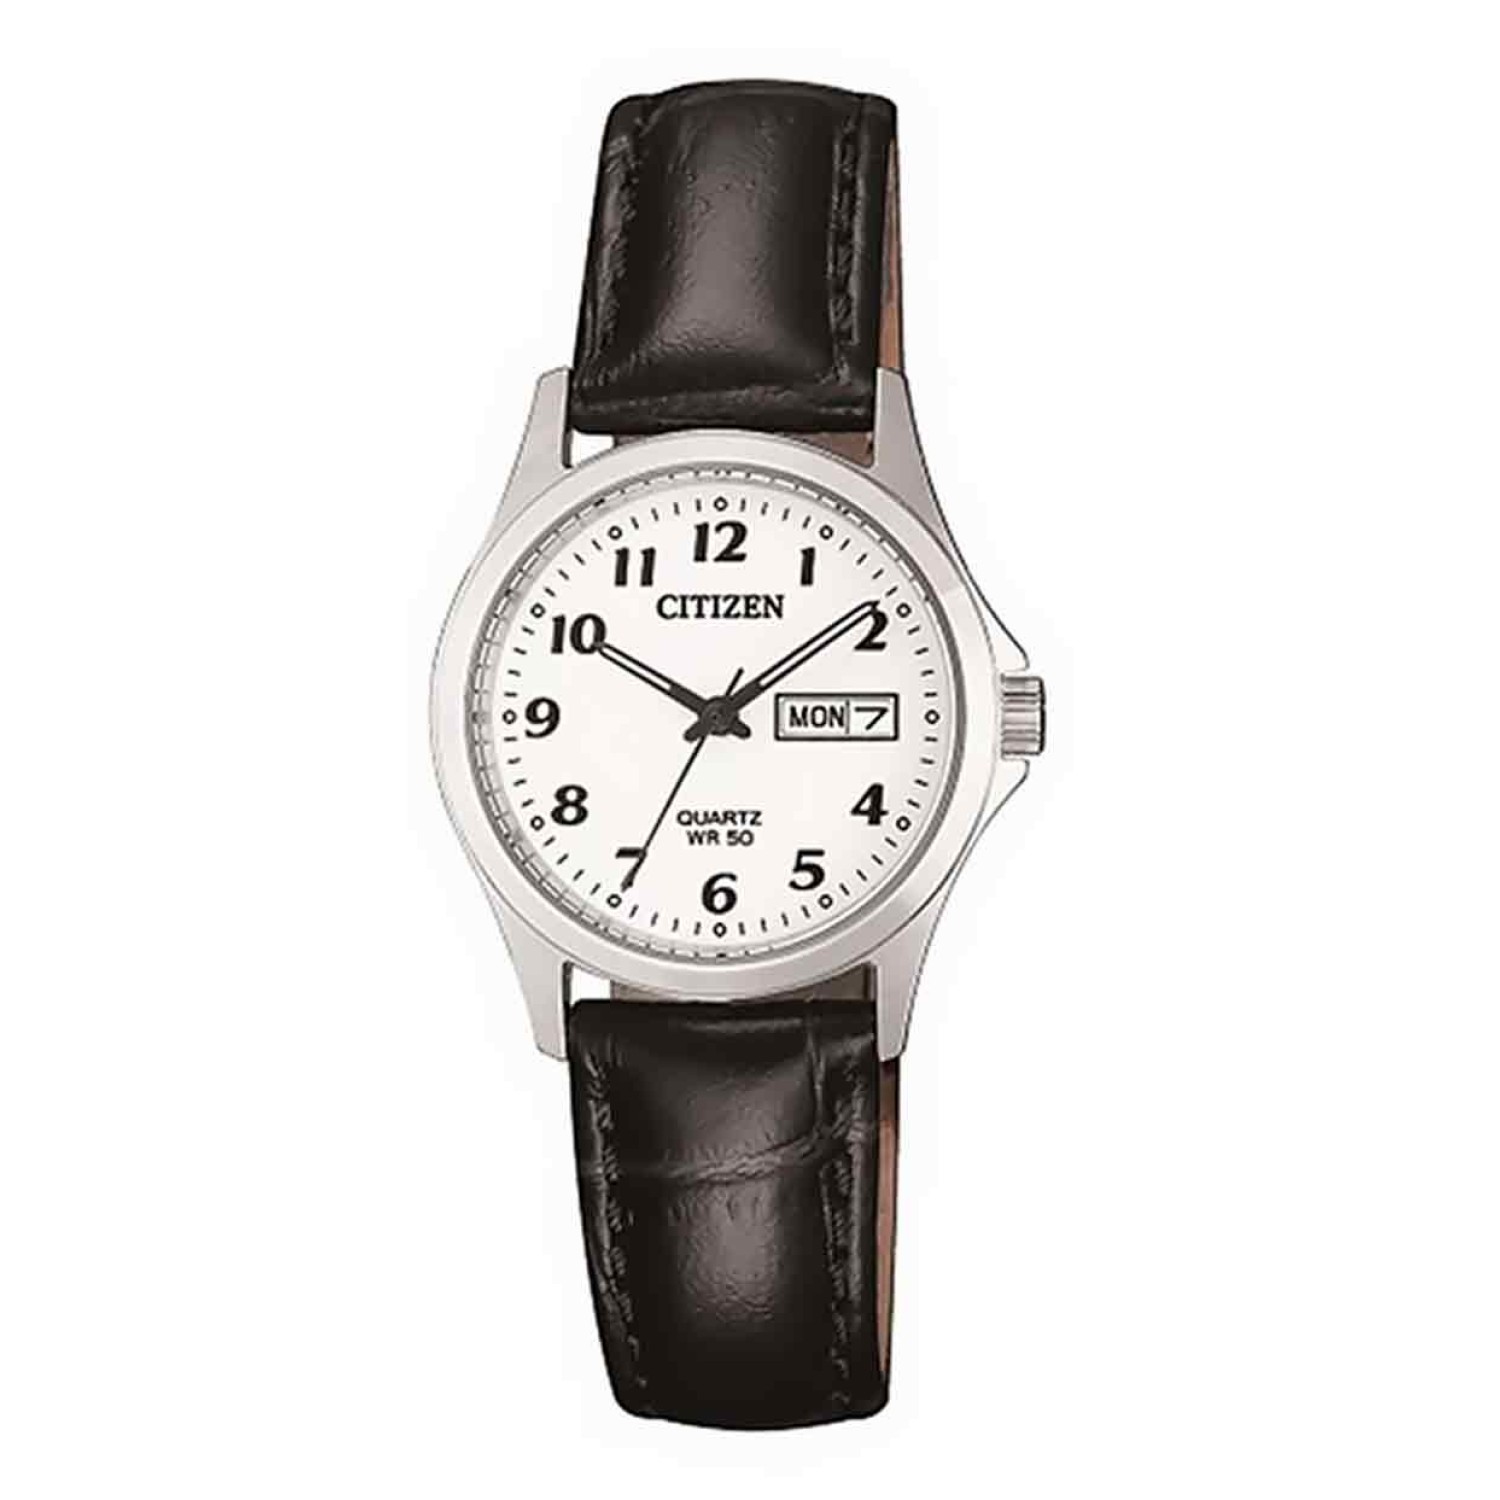 EQ2000-02A Citizen Ladies Watch. With strong stainless steel construction, fresh white dial with date display, silver toned bezel and rich brown oxhide leather band, it is crafted to be a tasteful accessory for an active lifestyle. Accurate to within 20 @